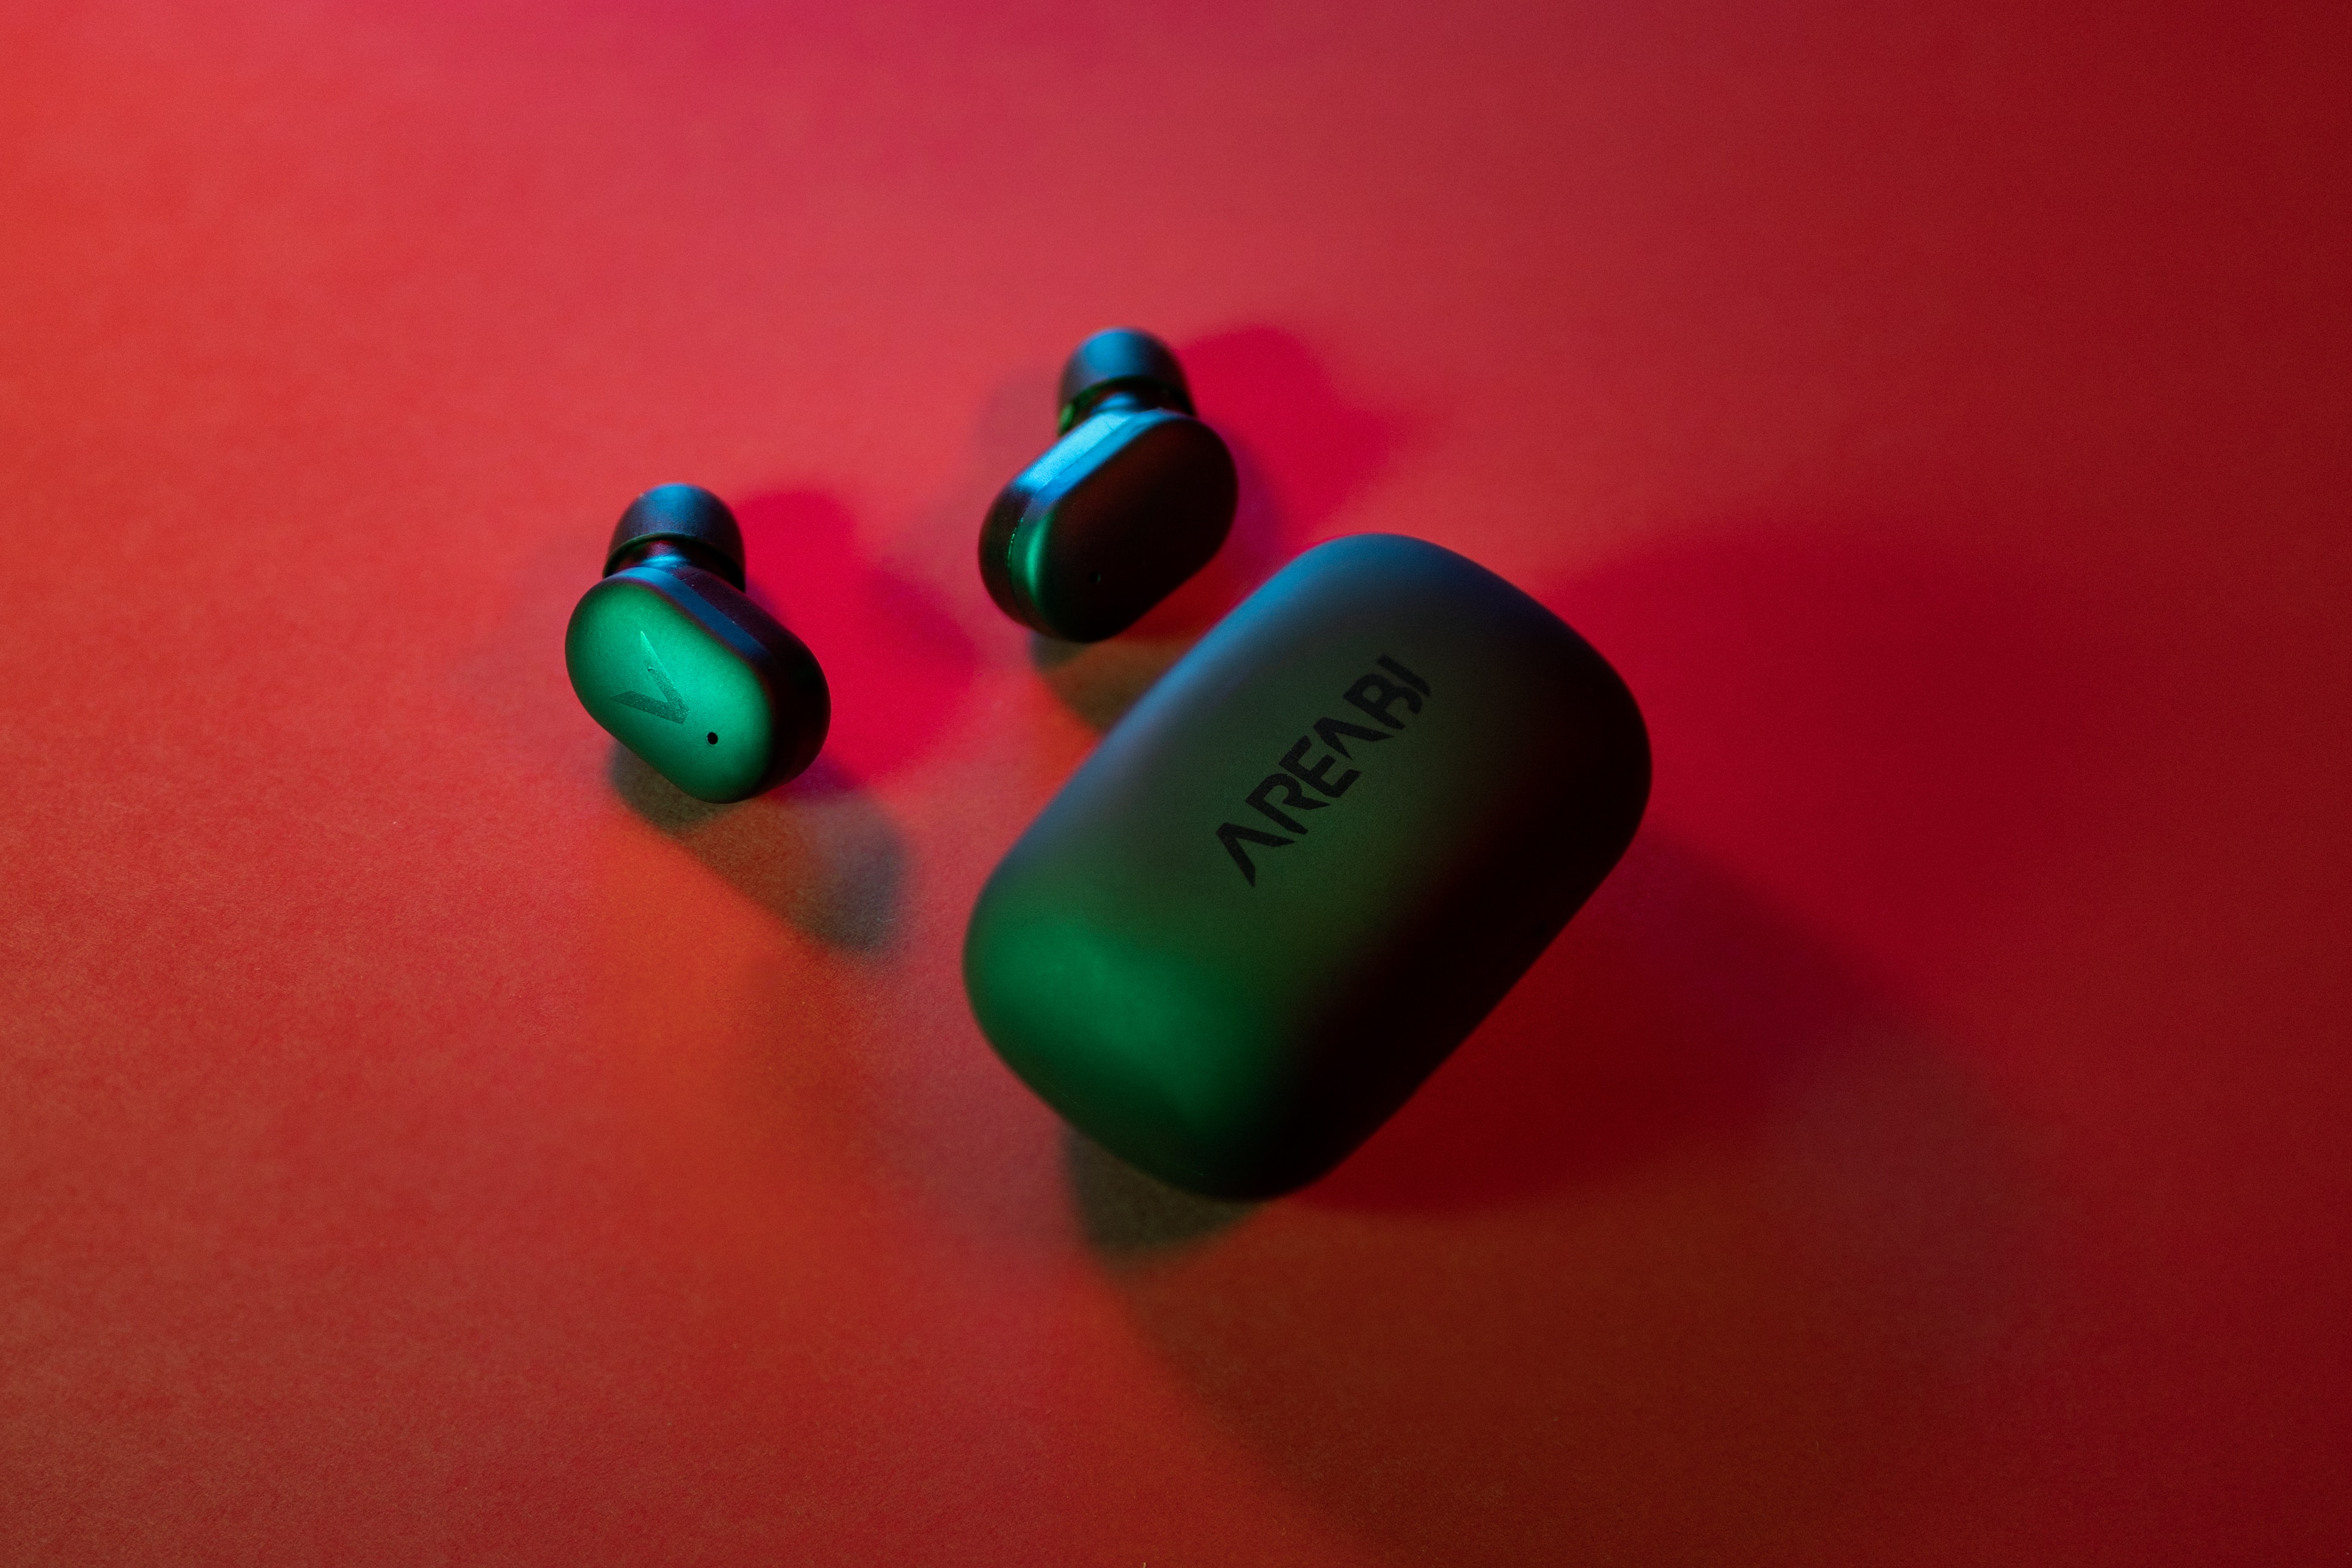 How To Adjust Volume On Wireless Earbuds | CellularNews